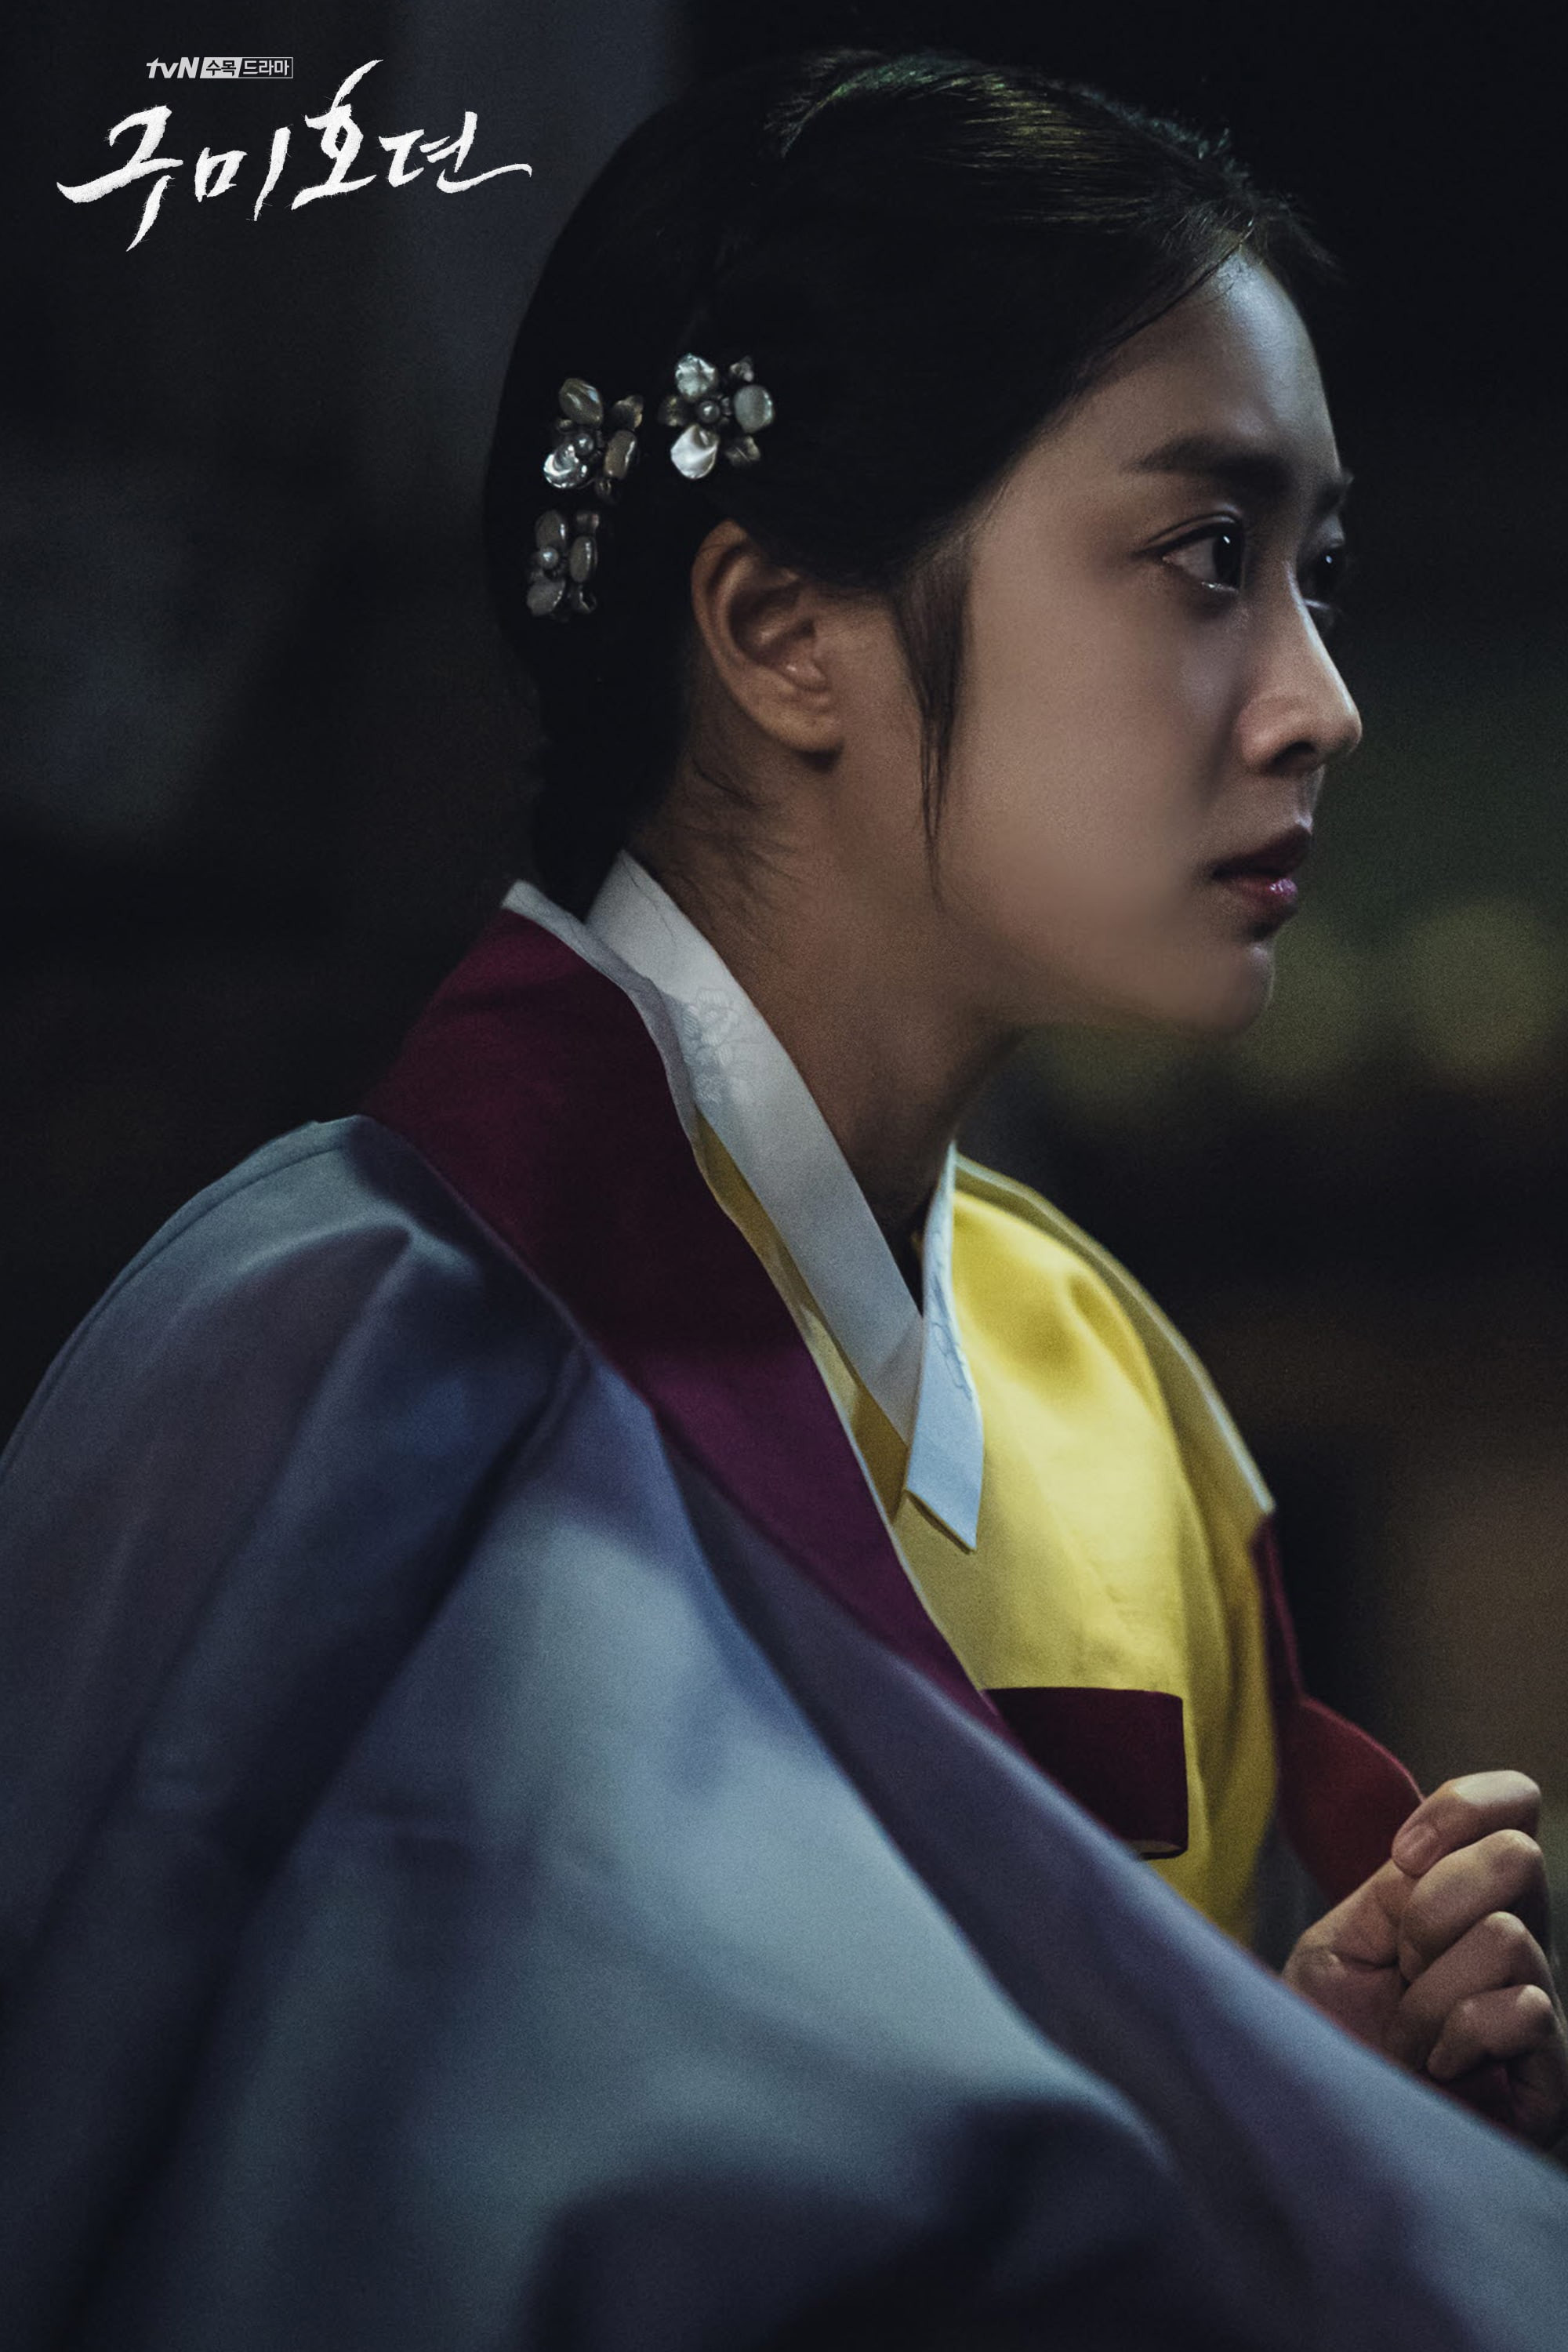 Jo Bo Ah Shields Lee Dong Wook From Danger In “Tale Of The Nine-Tailed”